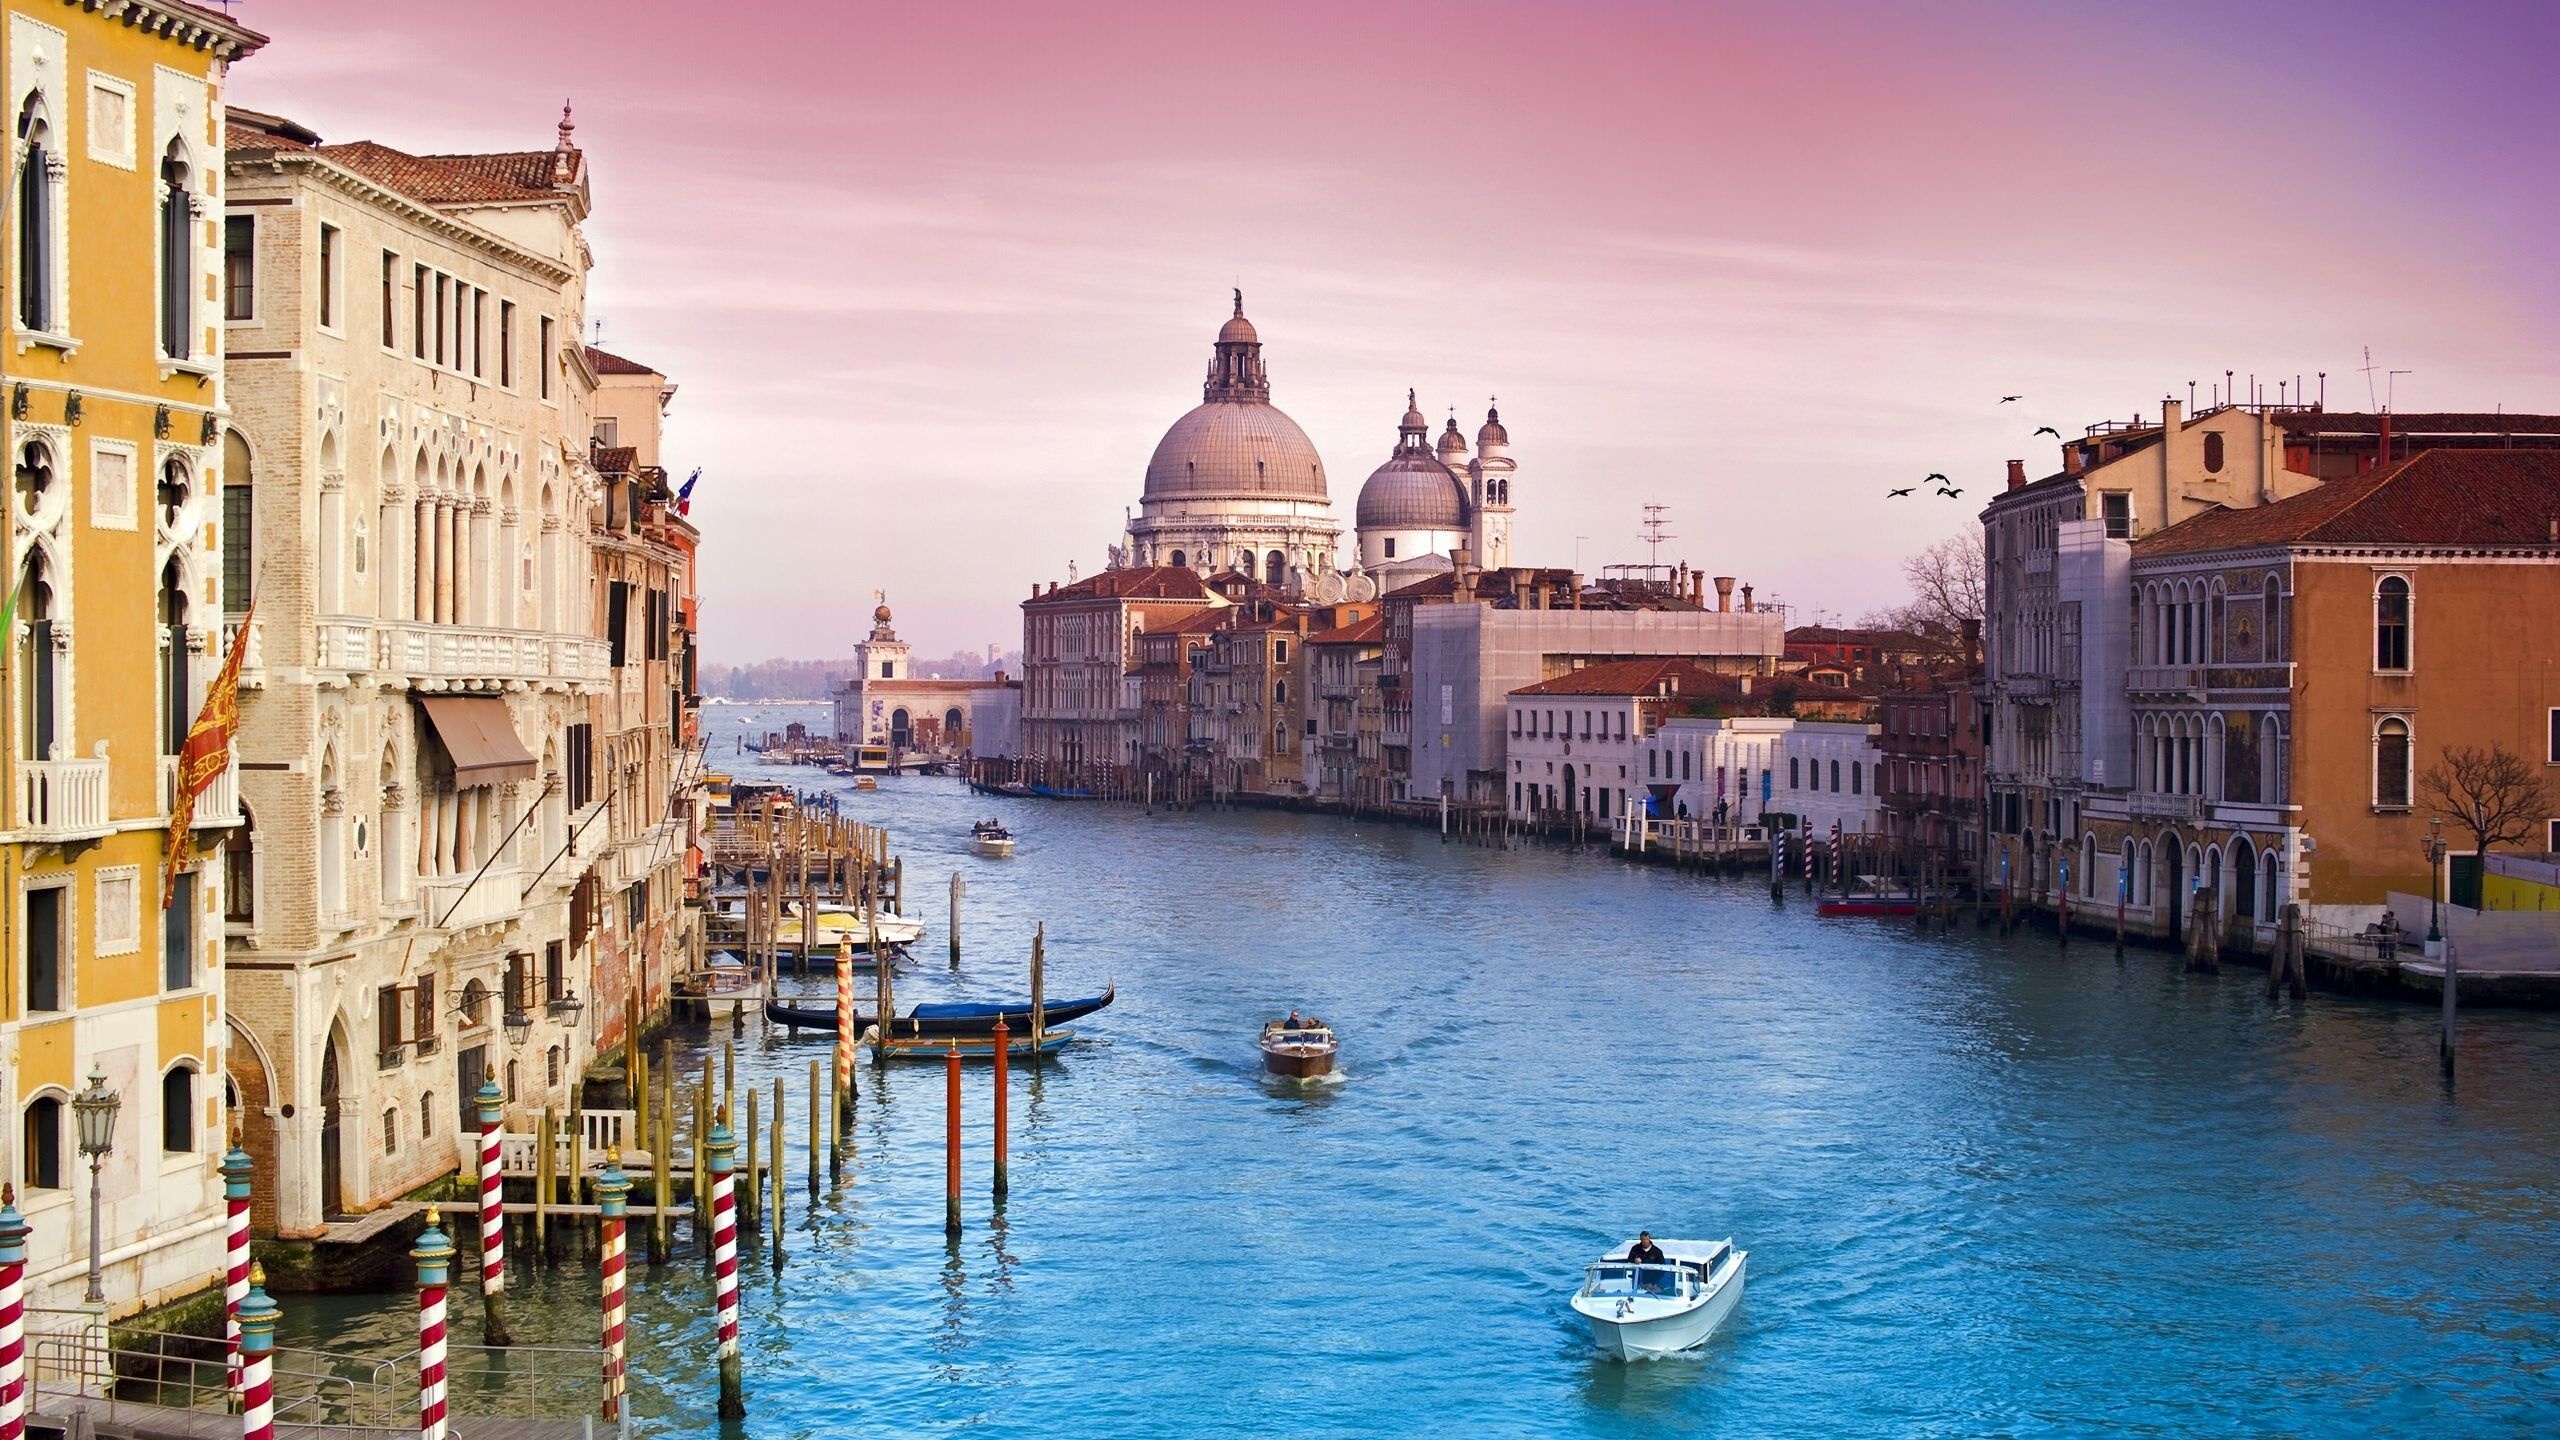 Venice: The city was ceded to Italy in 1866, City of Water. 2560x1440 HD Wallpaper.